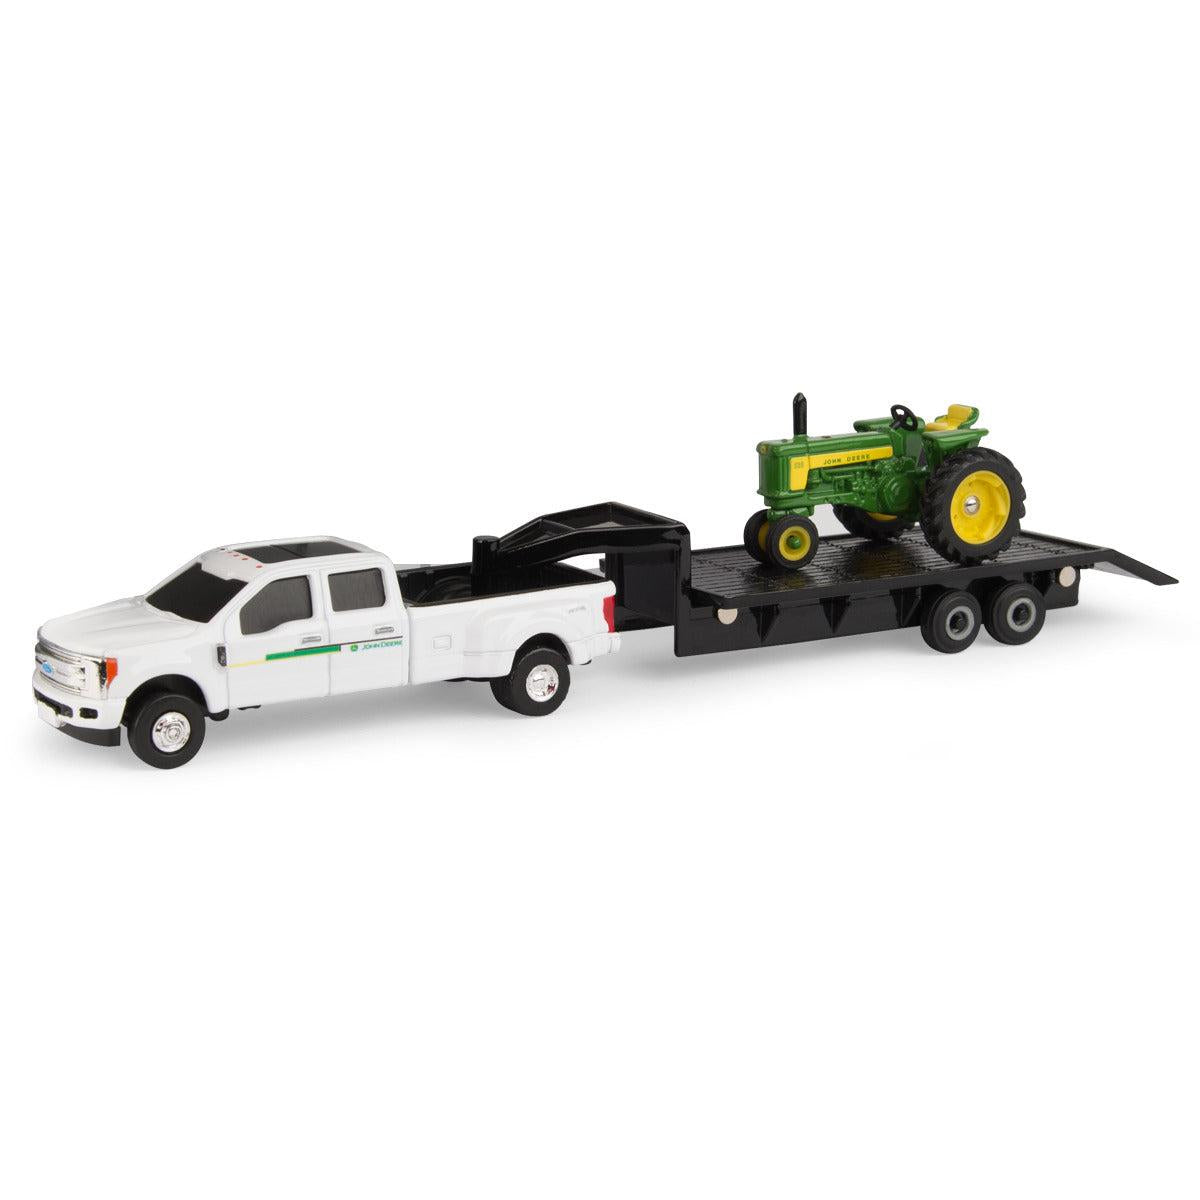 1/64 John Deere 530 Tractor with trailer and Ford truck Toy - LP68816